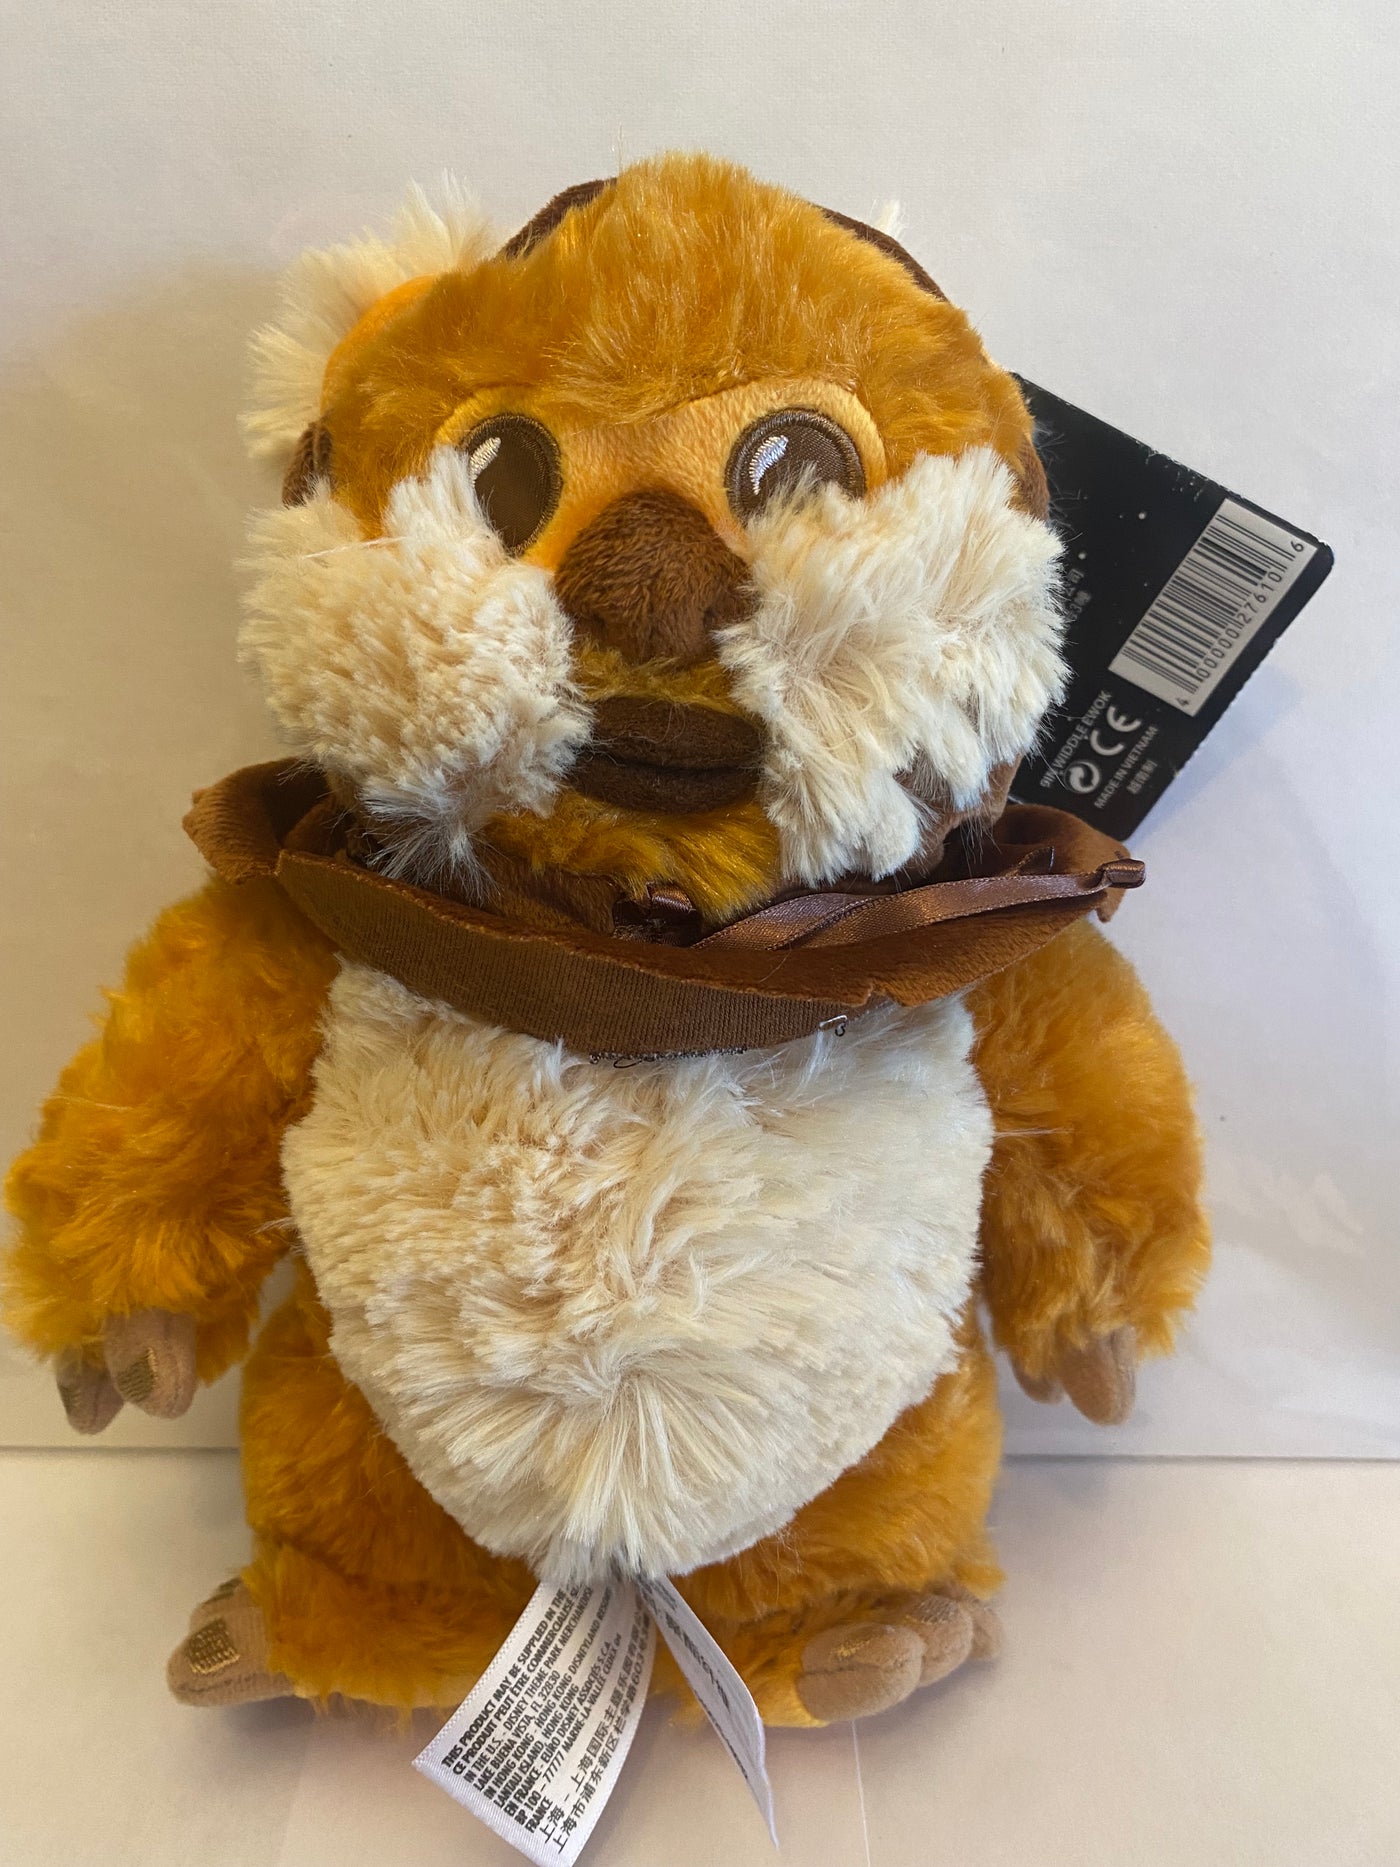 Disney Parks Star Wars Widdle Ewok 9in Plush New with Tags